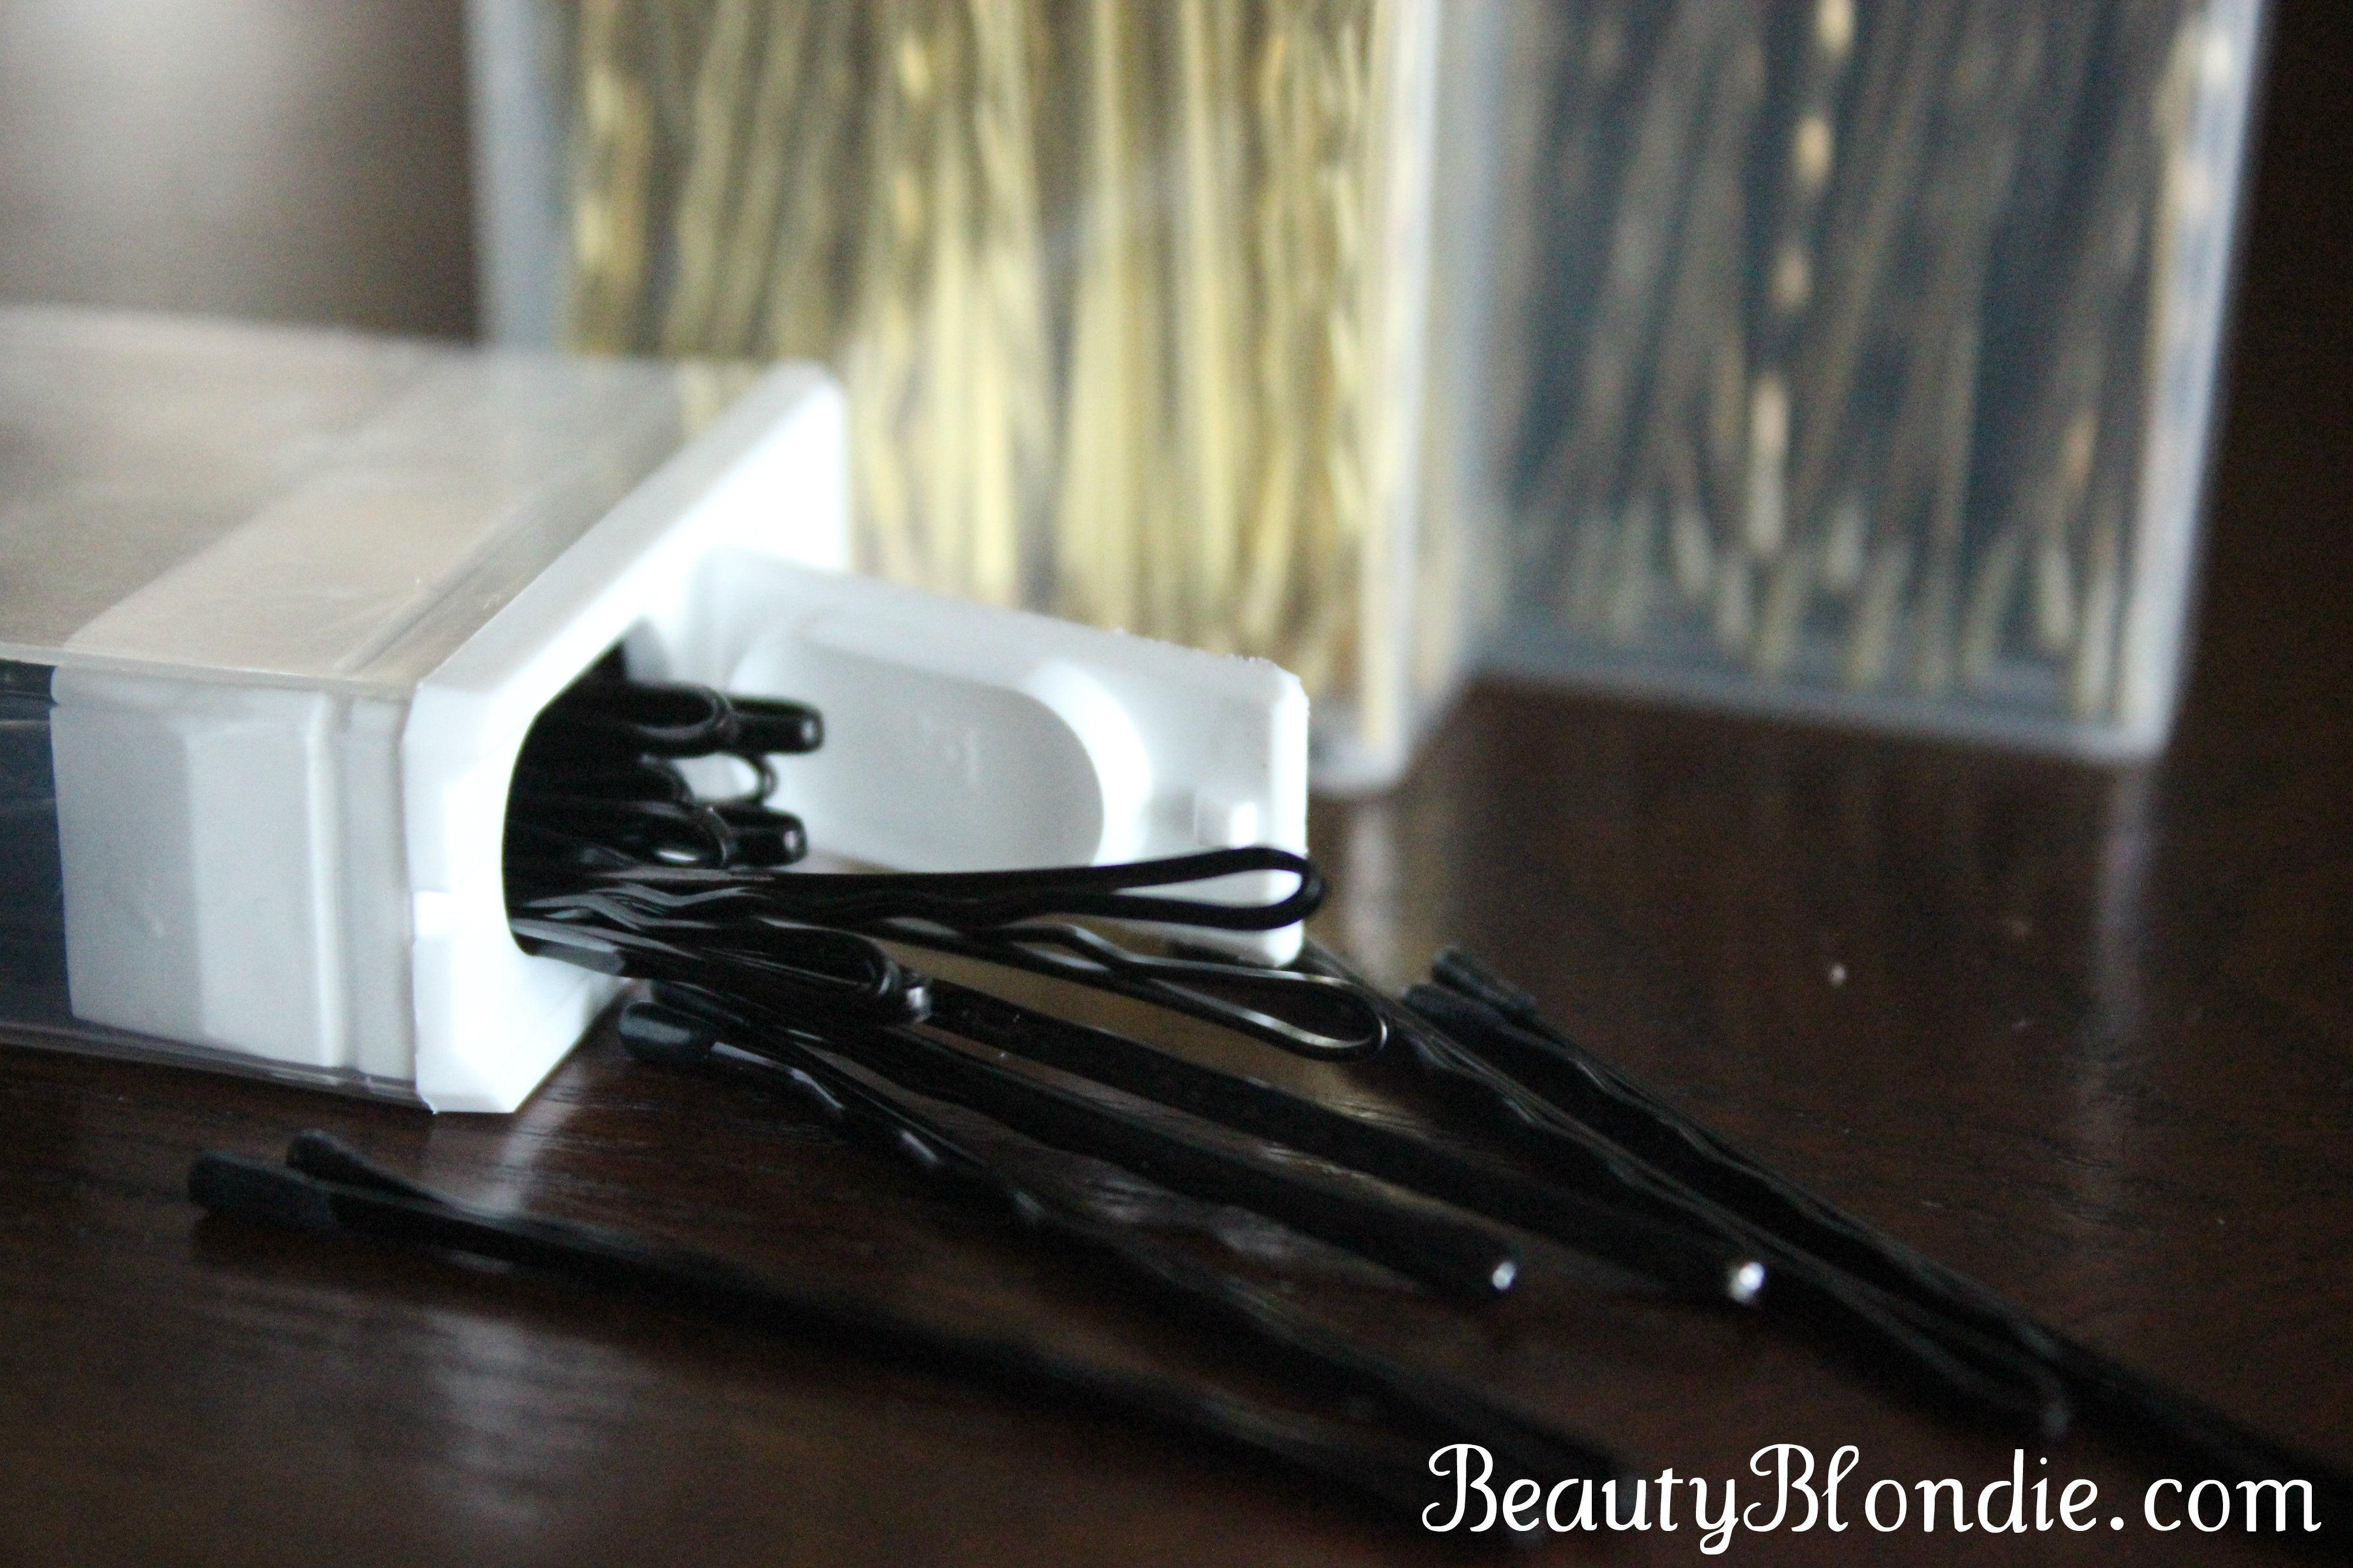 How To: Organize Your Bobby Pins